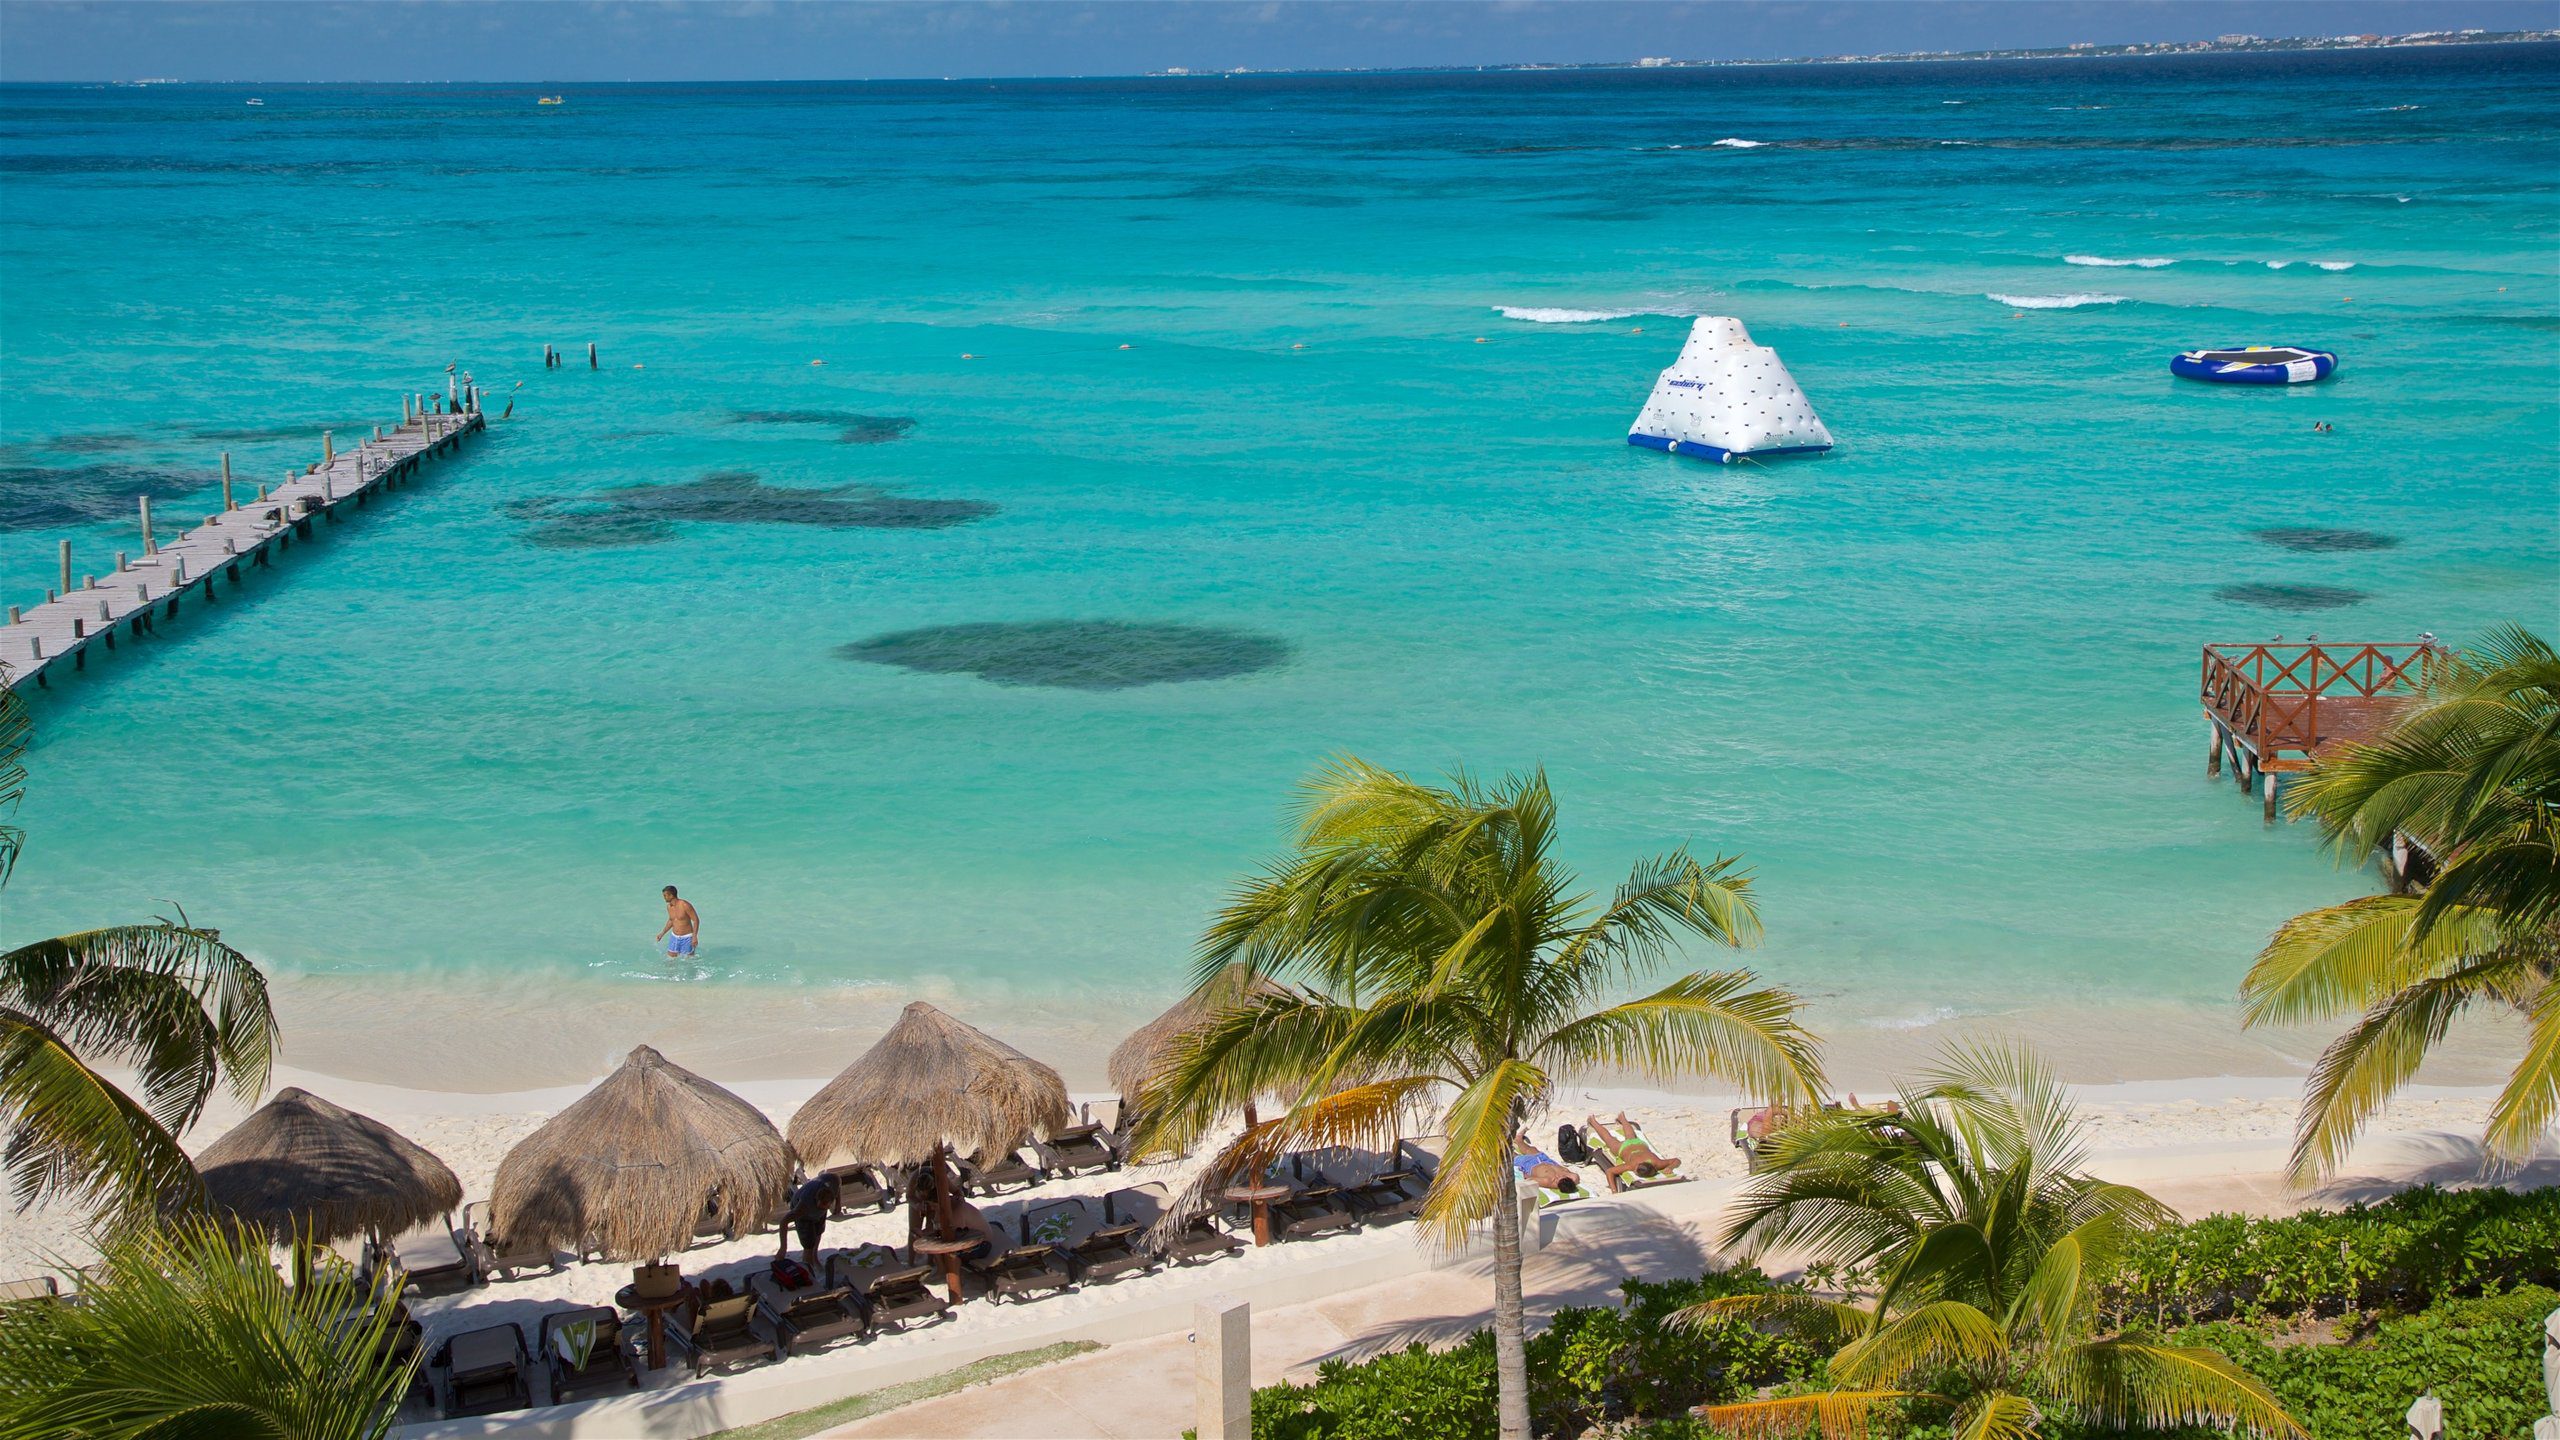 Cheap flights from Detroit to Cancun